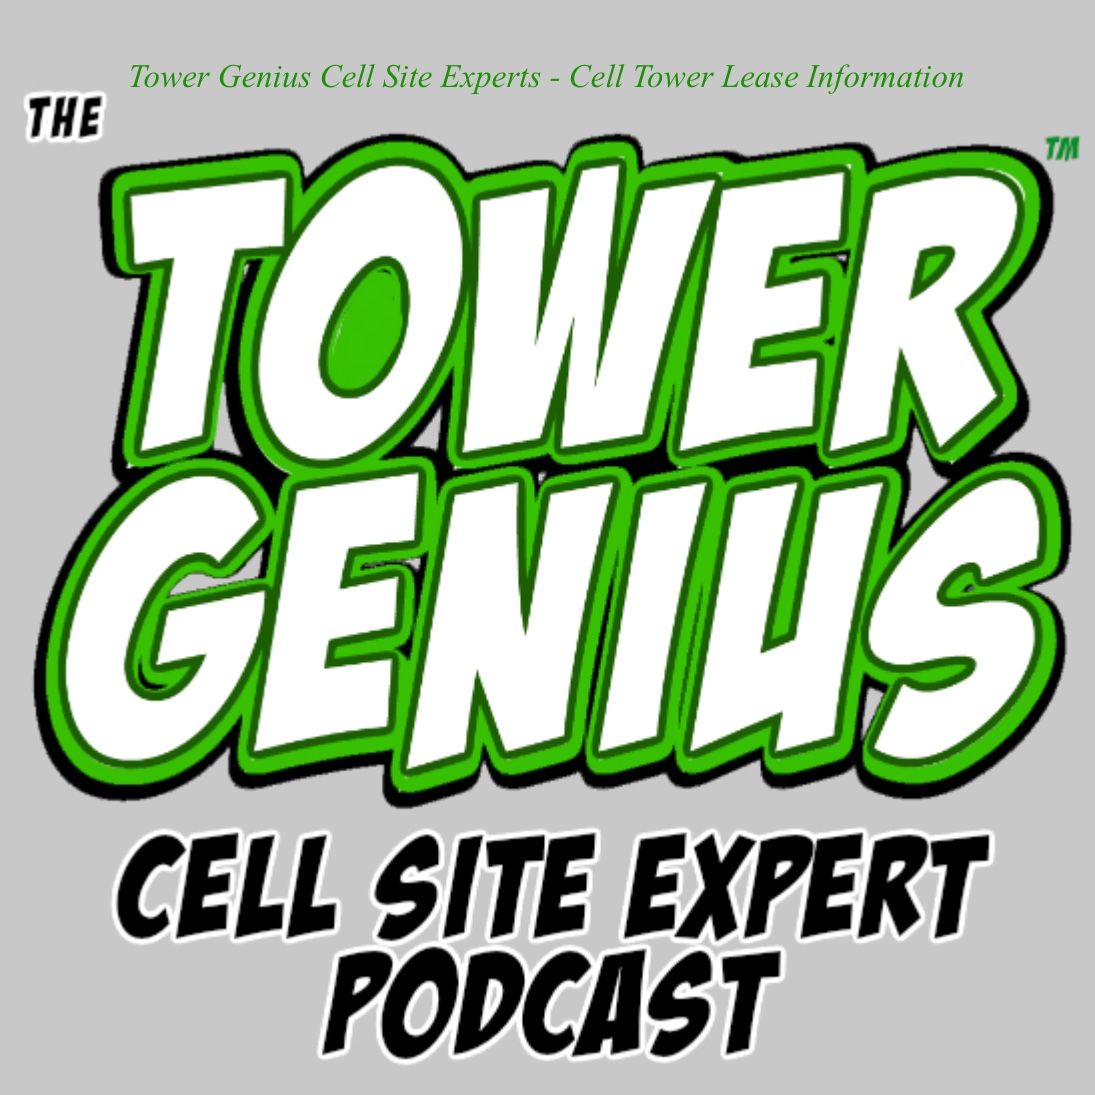 Tower Genius Cell Site Experts - Wireless Industry Vets Provide Cell Tower Lease Information